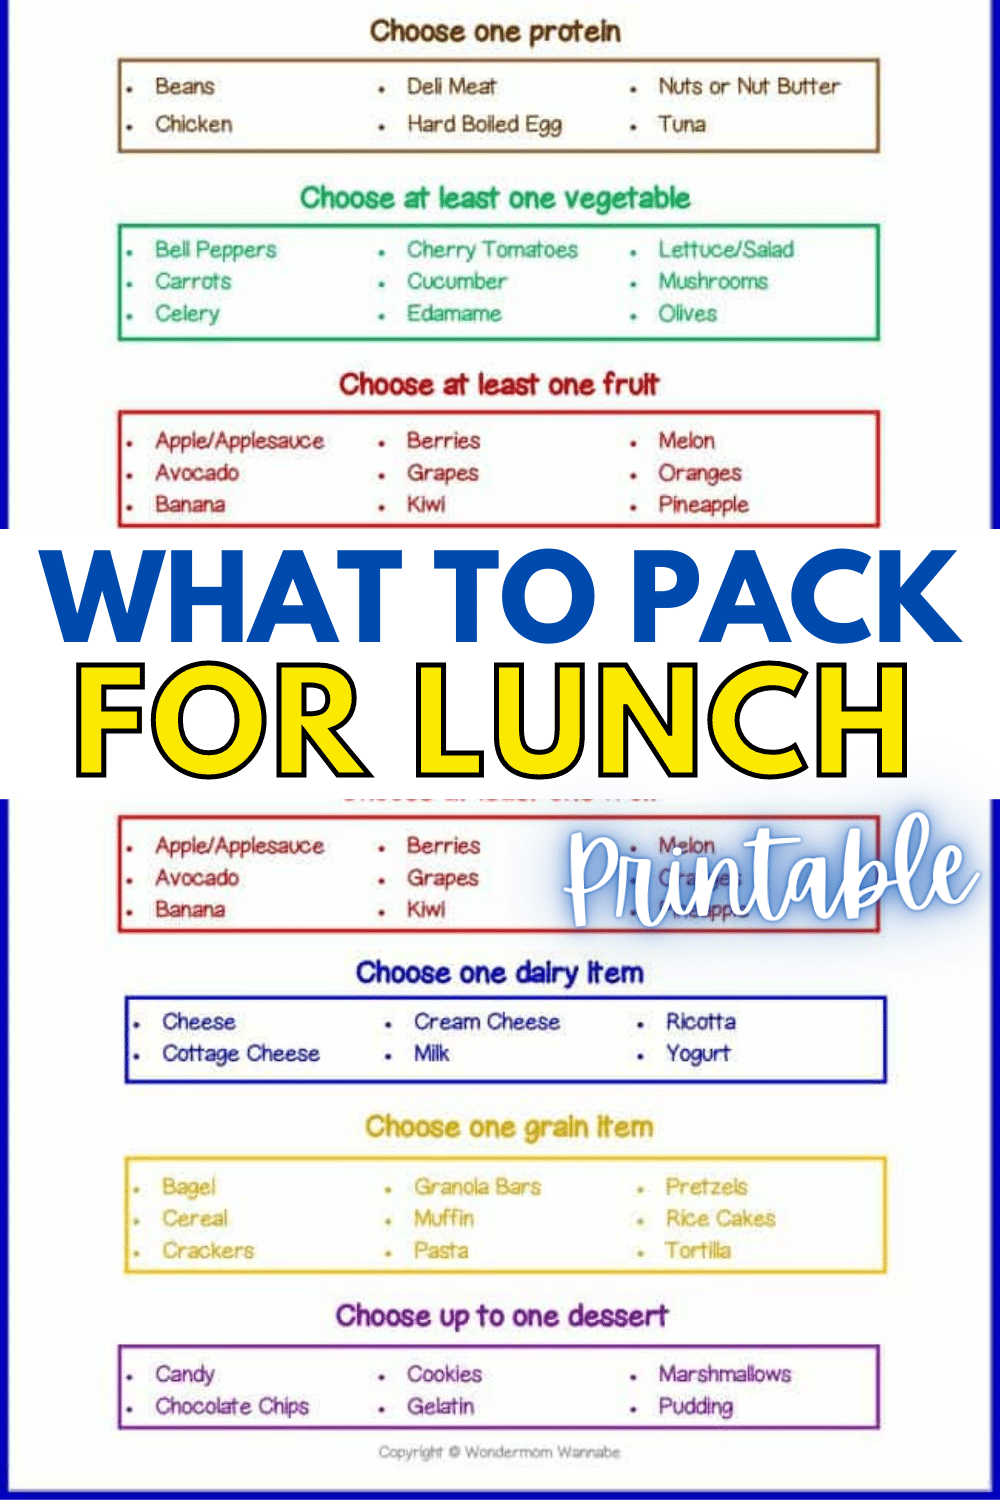 Use this What to Pack for Lunch printable sheet to help your kids make smart food choices on their own and learn an important life skill. #freeprintable #forkids #whattopackforlunch #parentingadvice via @wondermomwannab